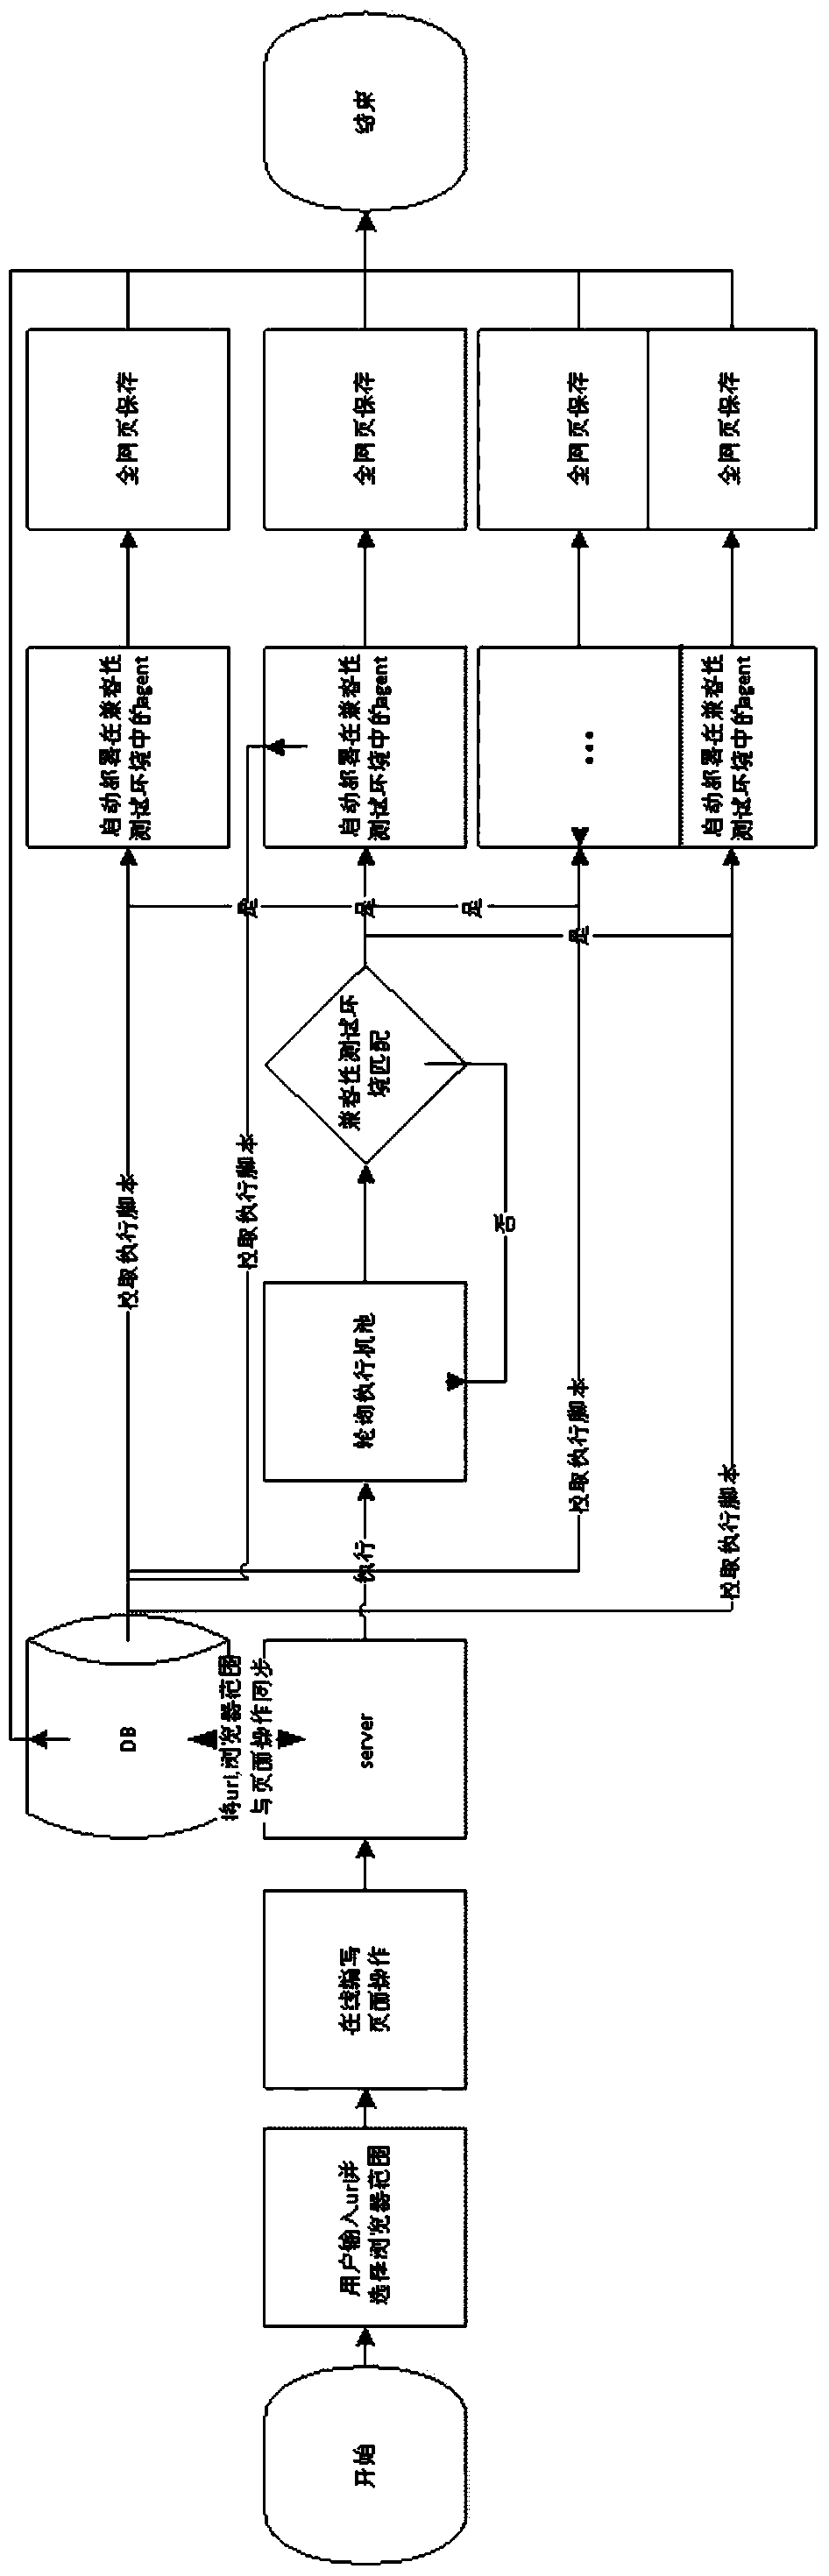 Web browser compatibility testing method and device